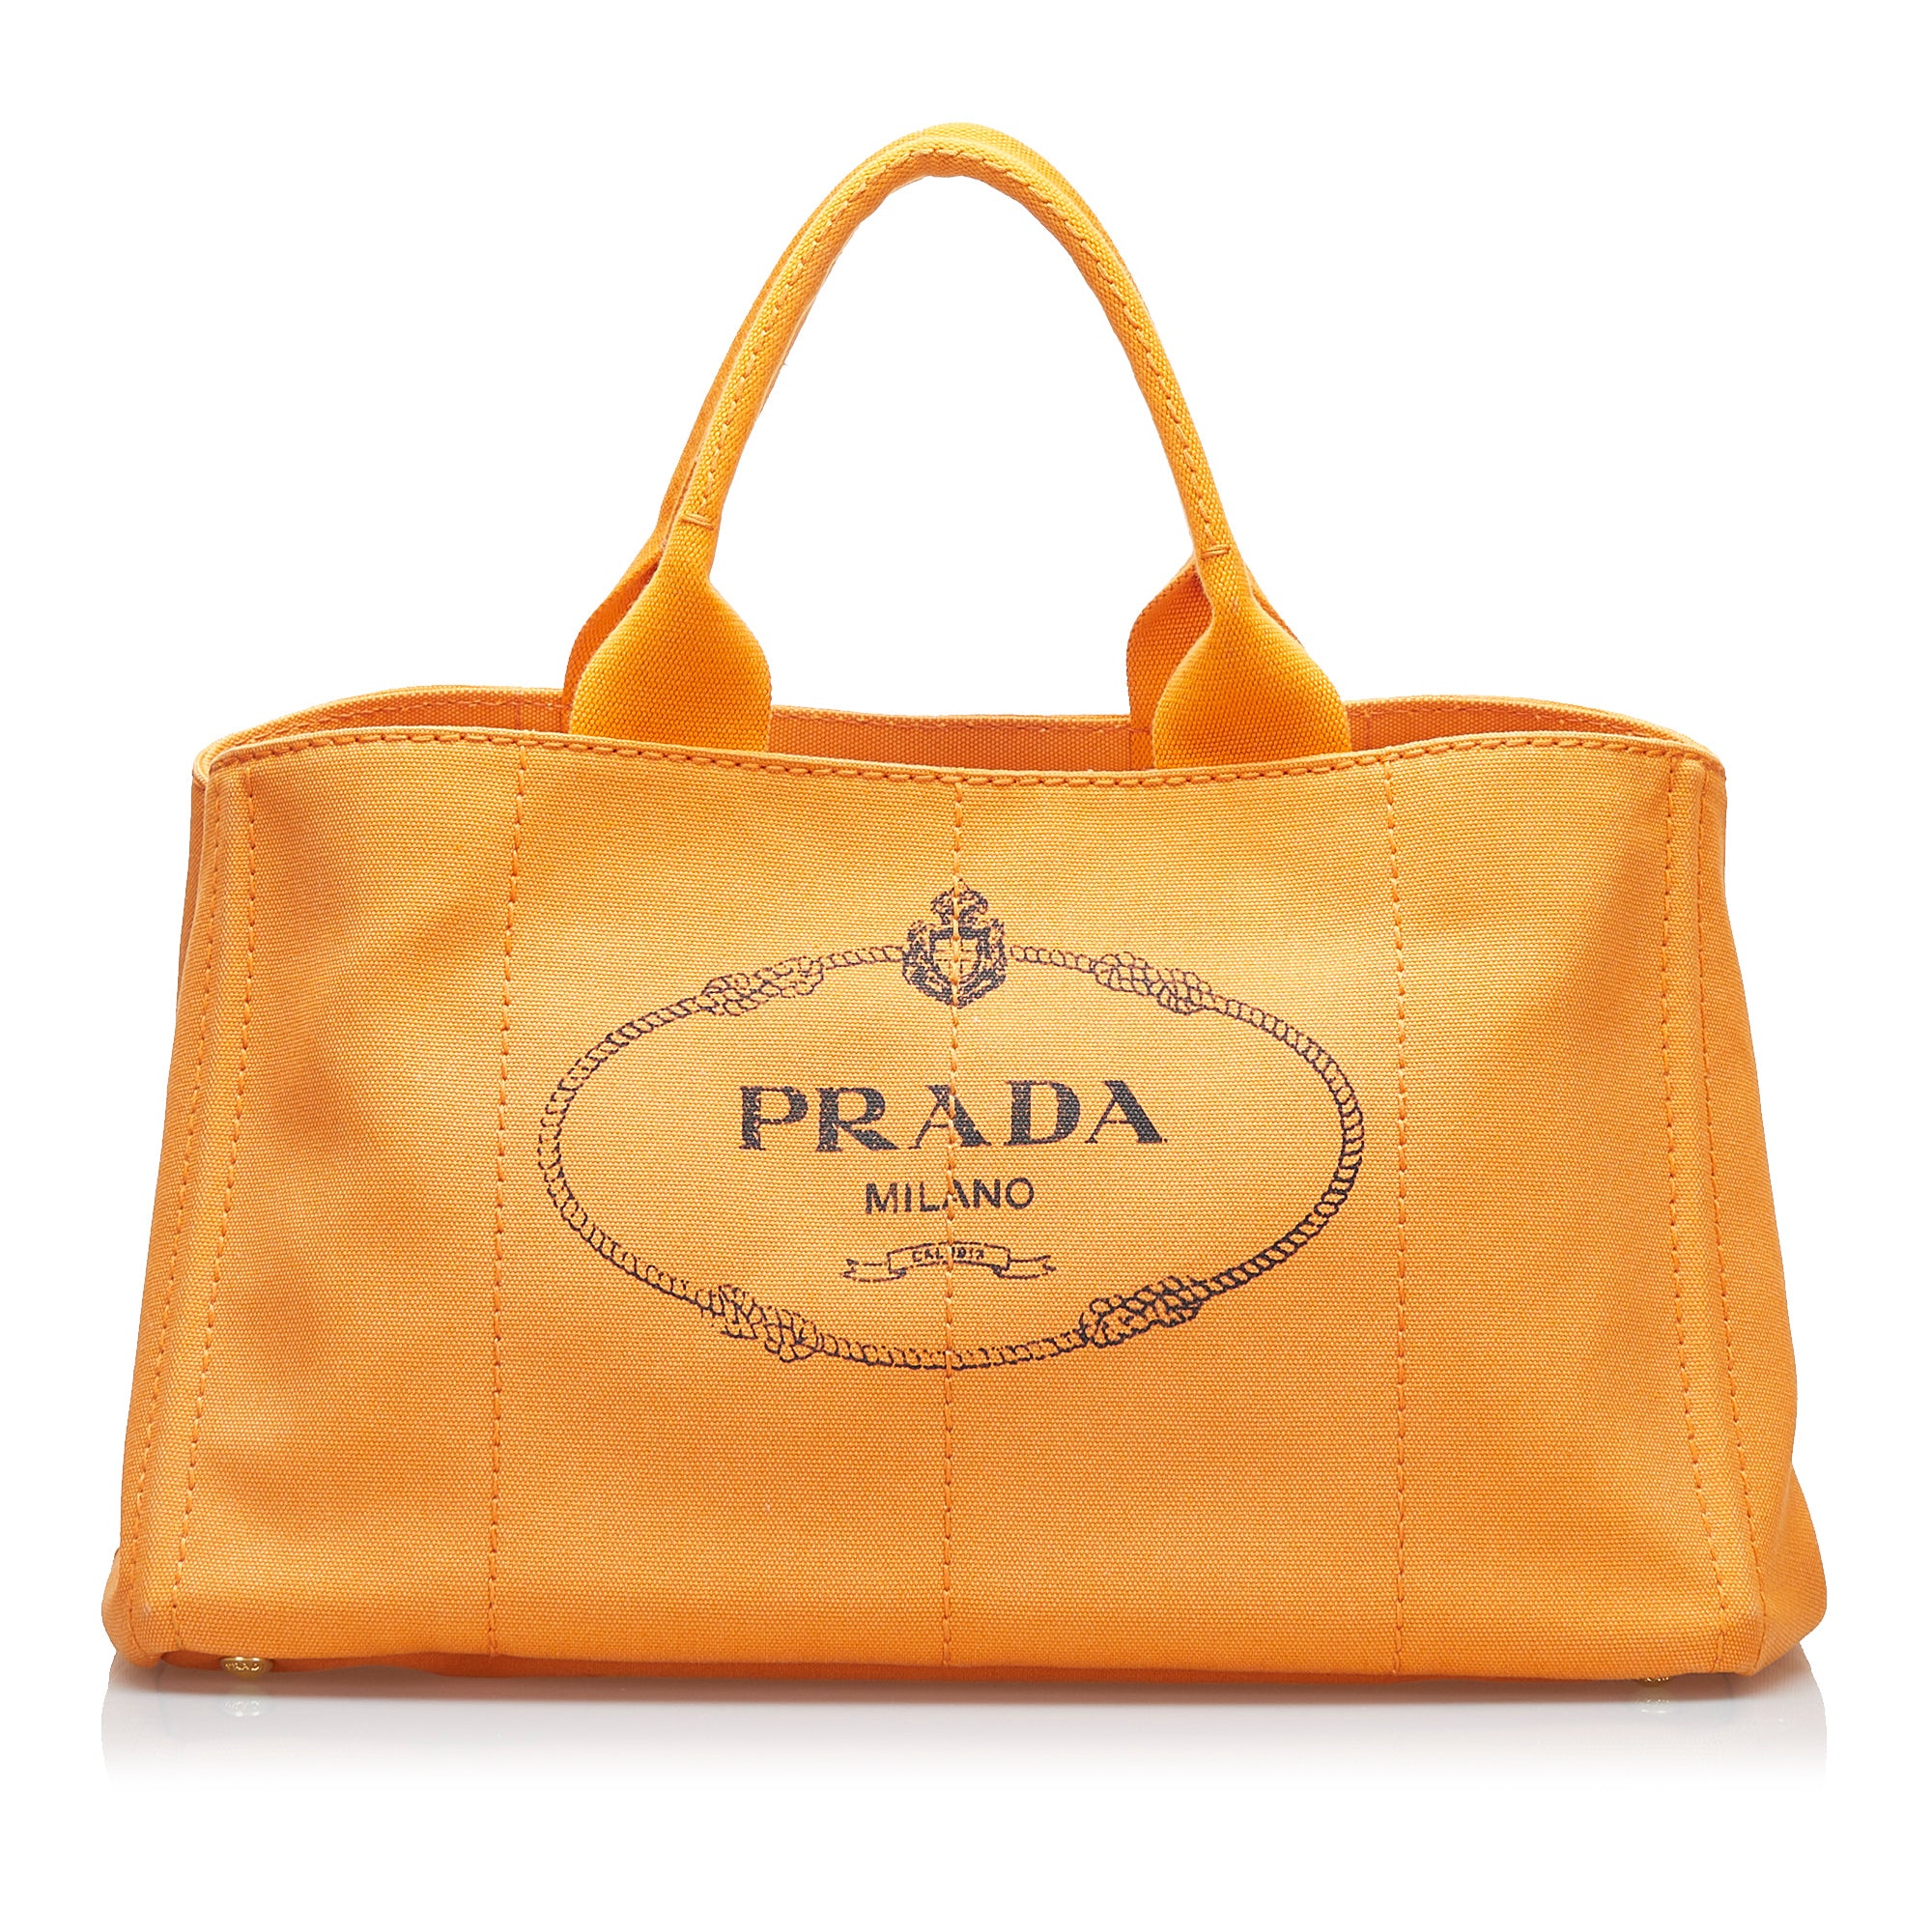 prada bl0758 aged pink saffiano leather bowler, gold hardware, with sling &  card, no dust cover